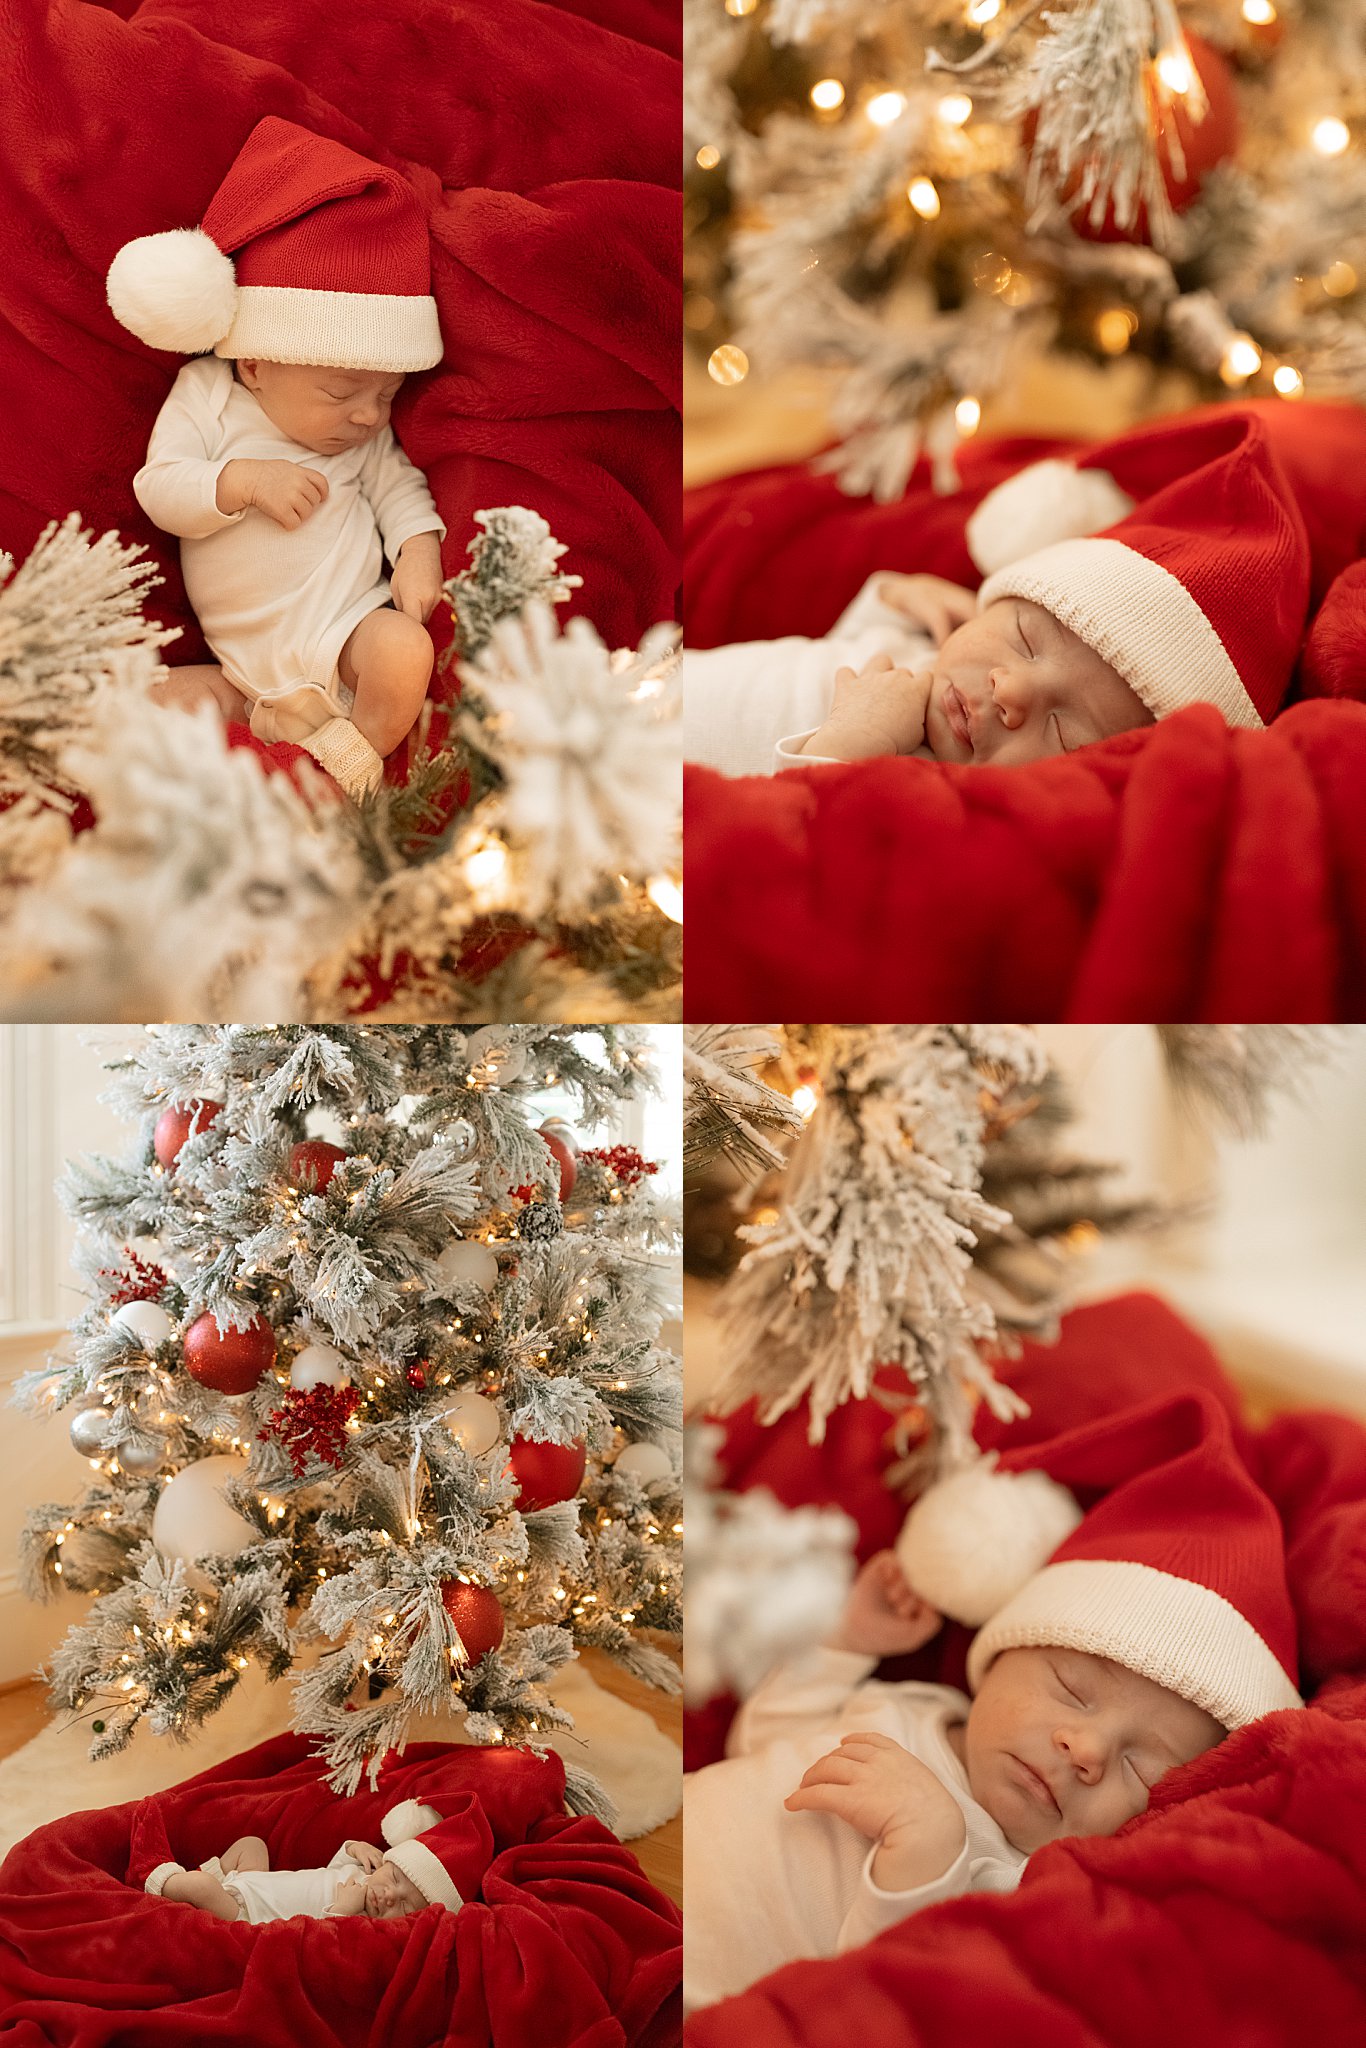 newborn baby wearing santa hat and stockings lays on red blanket under christmas tree by Nikki Meer Photography